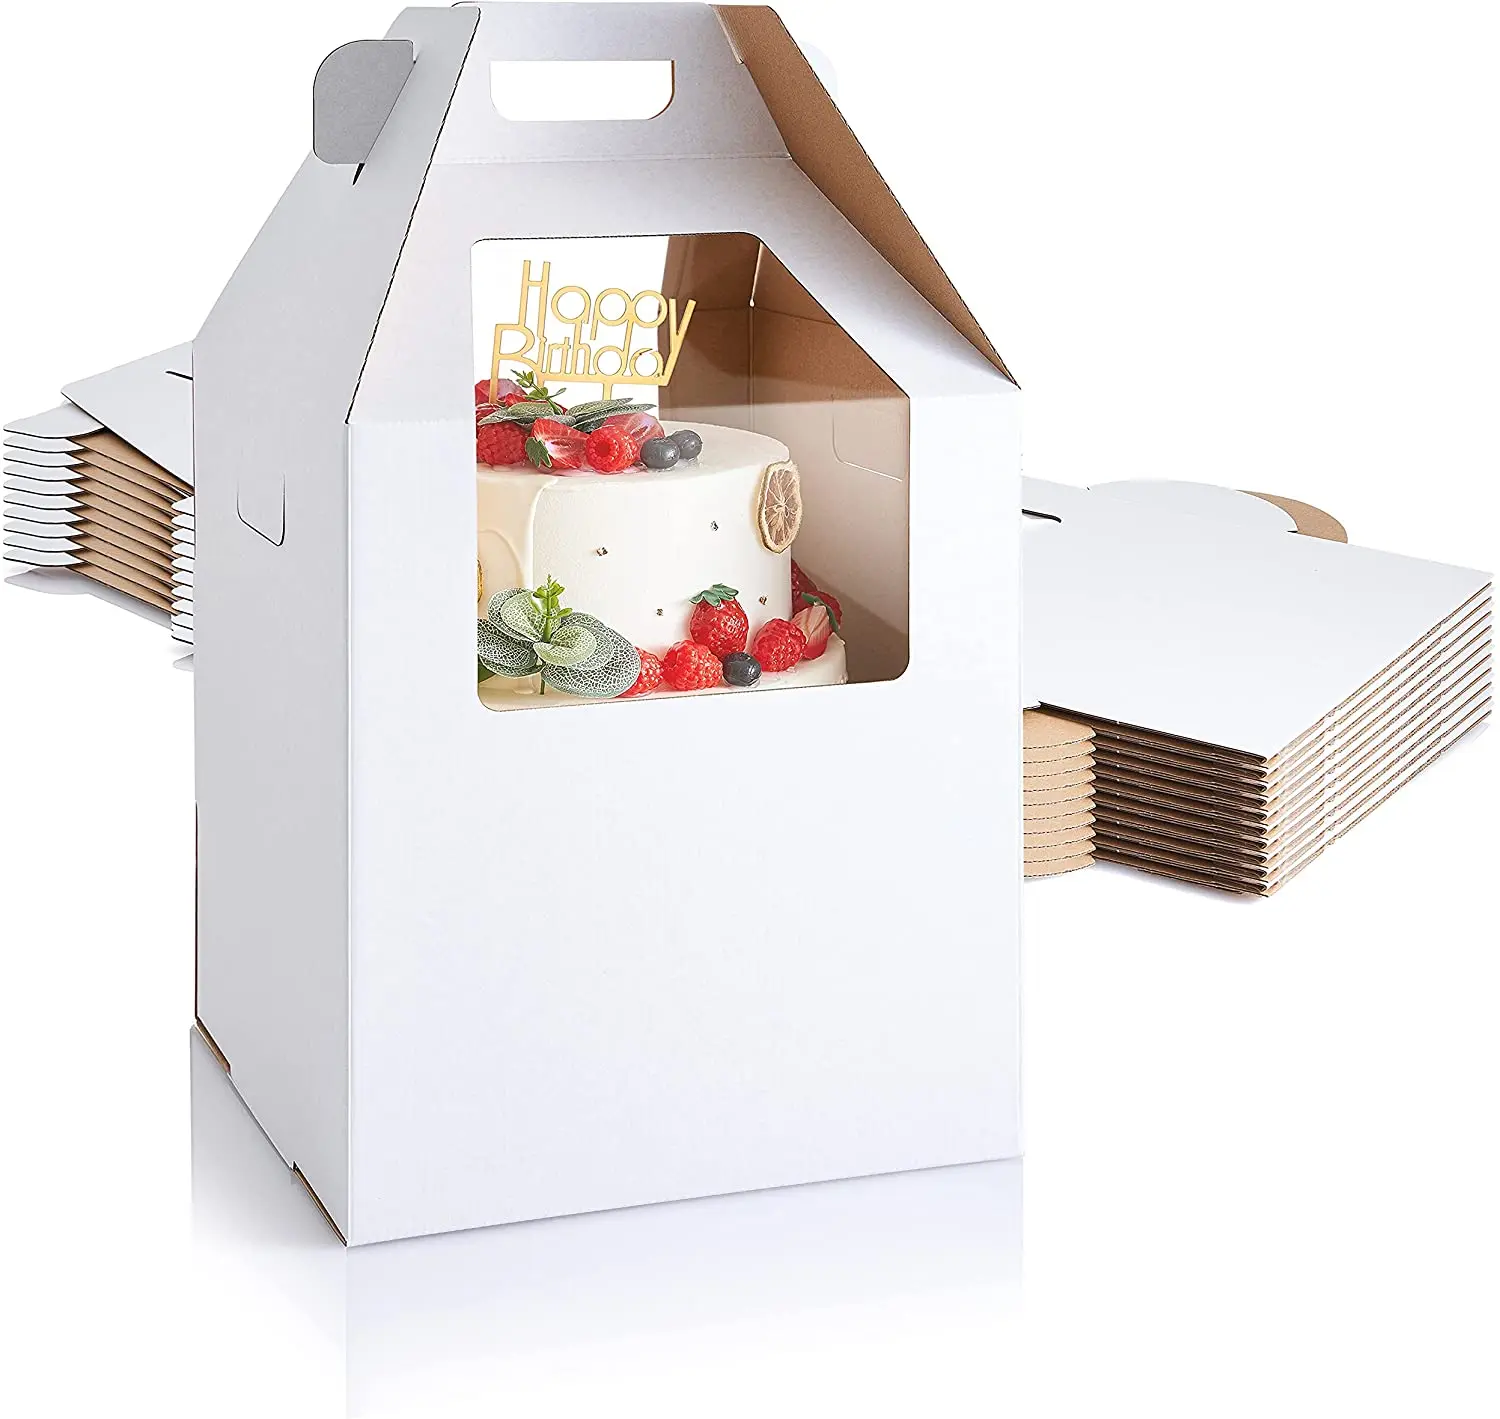 Find Wholesale Wedding Cake Boxes Supplies To Order Online - Alibaba.com